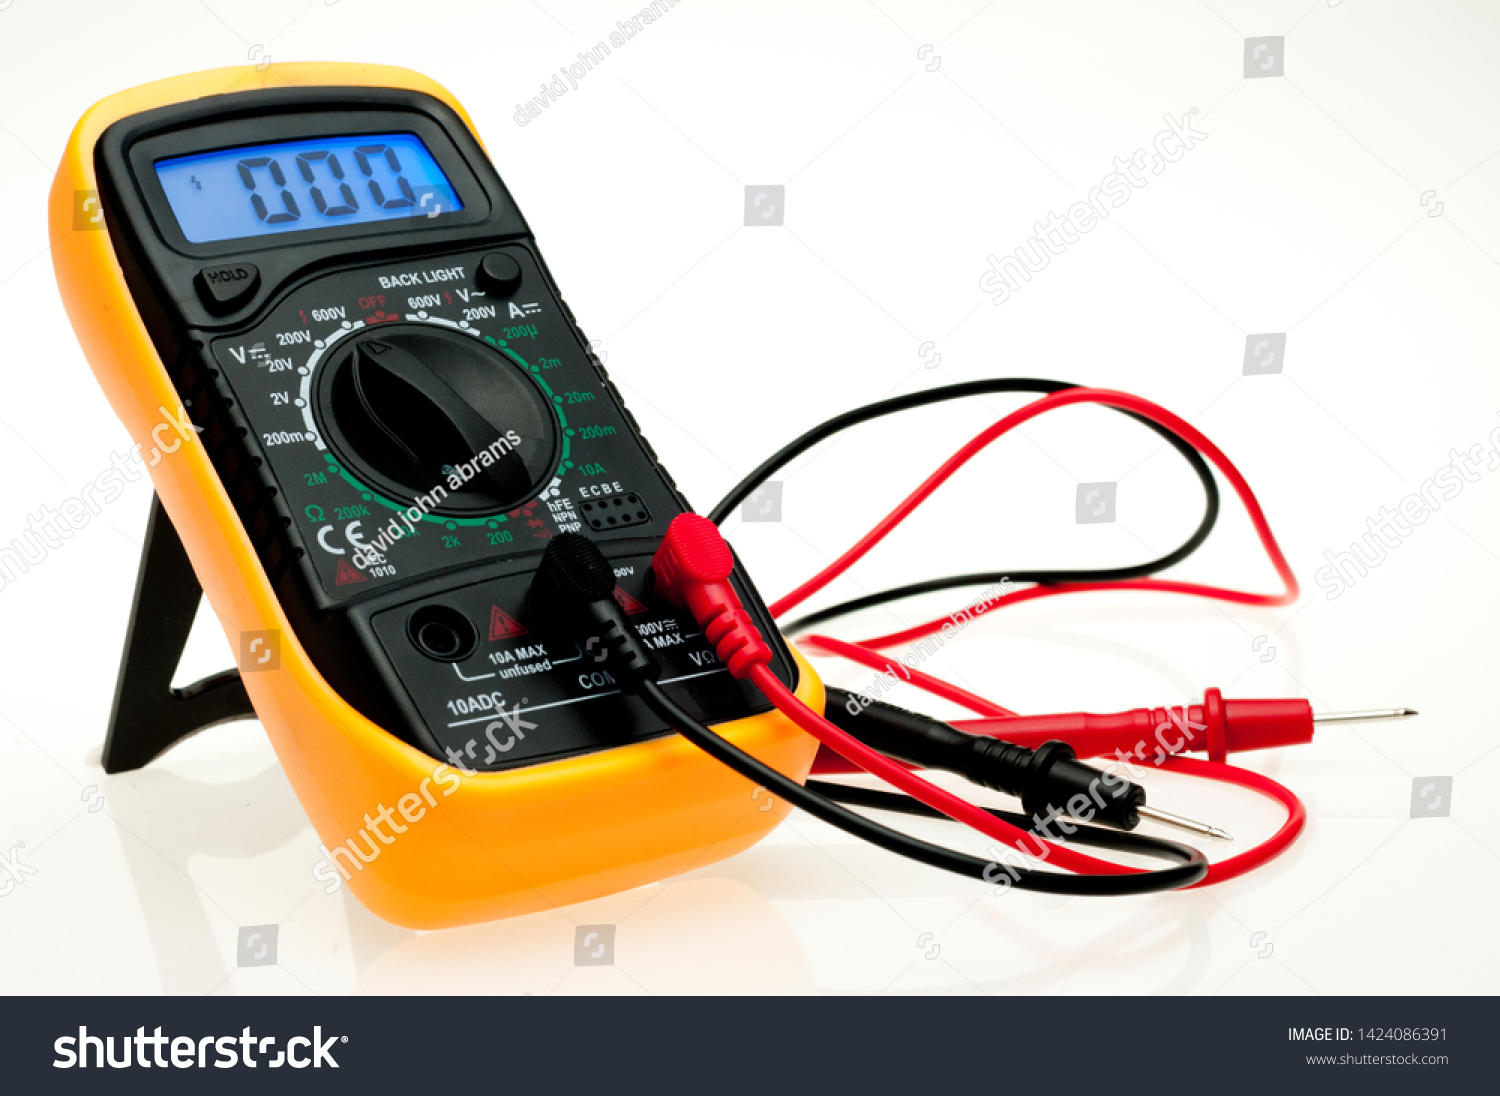 Digital multimeter with probes and blue backlit display on a white background #1424086391